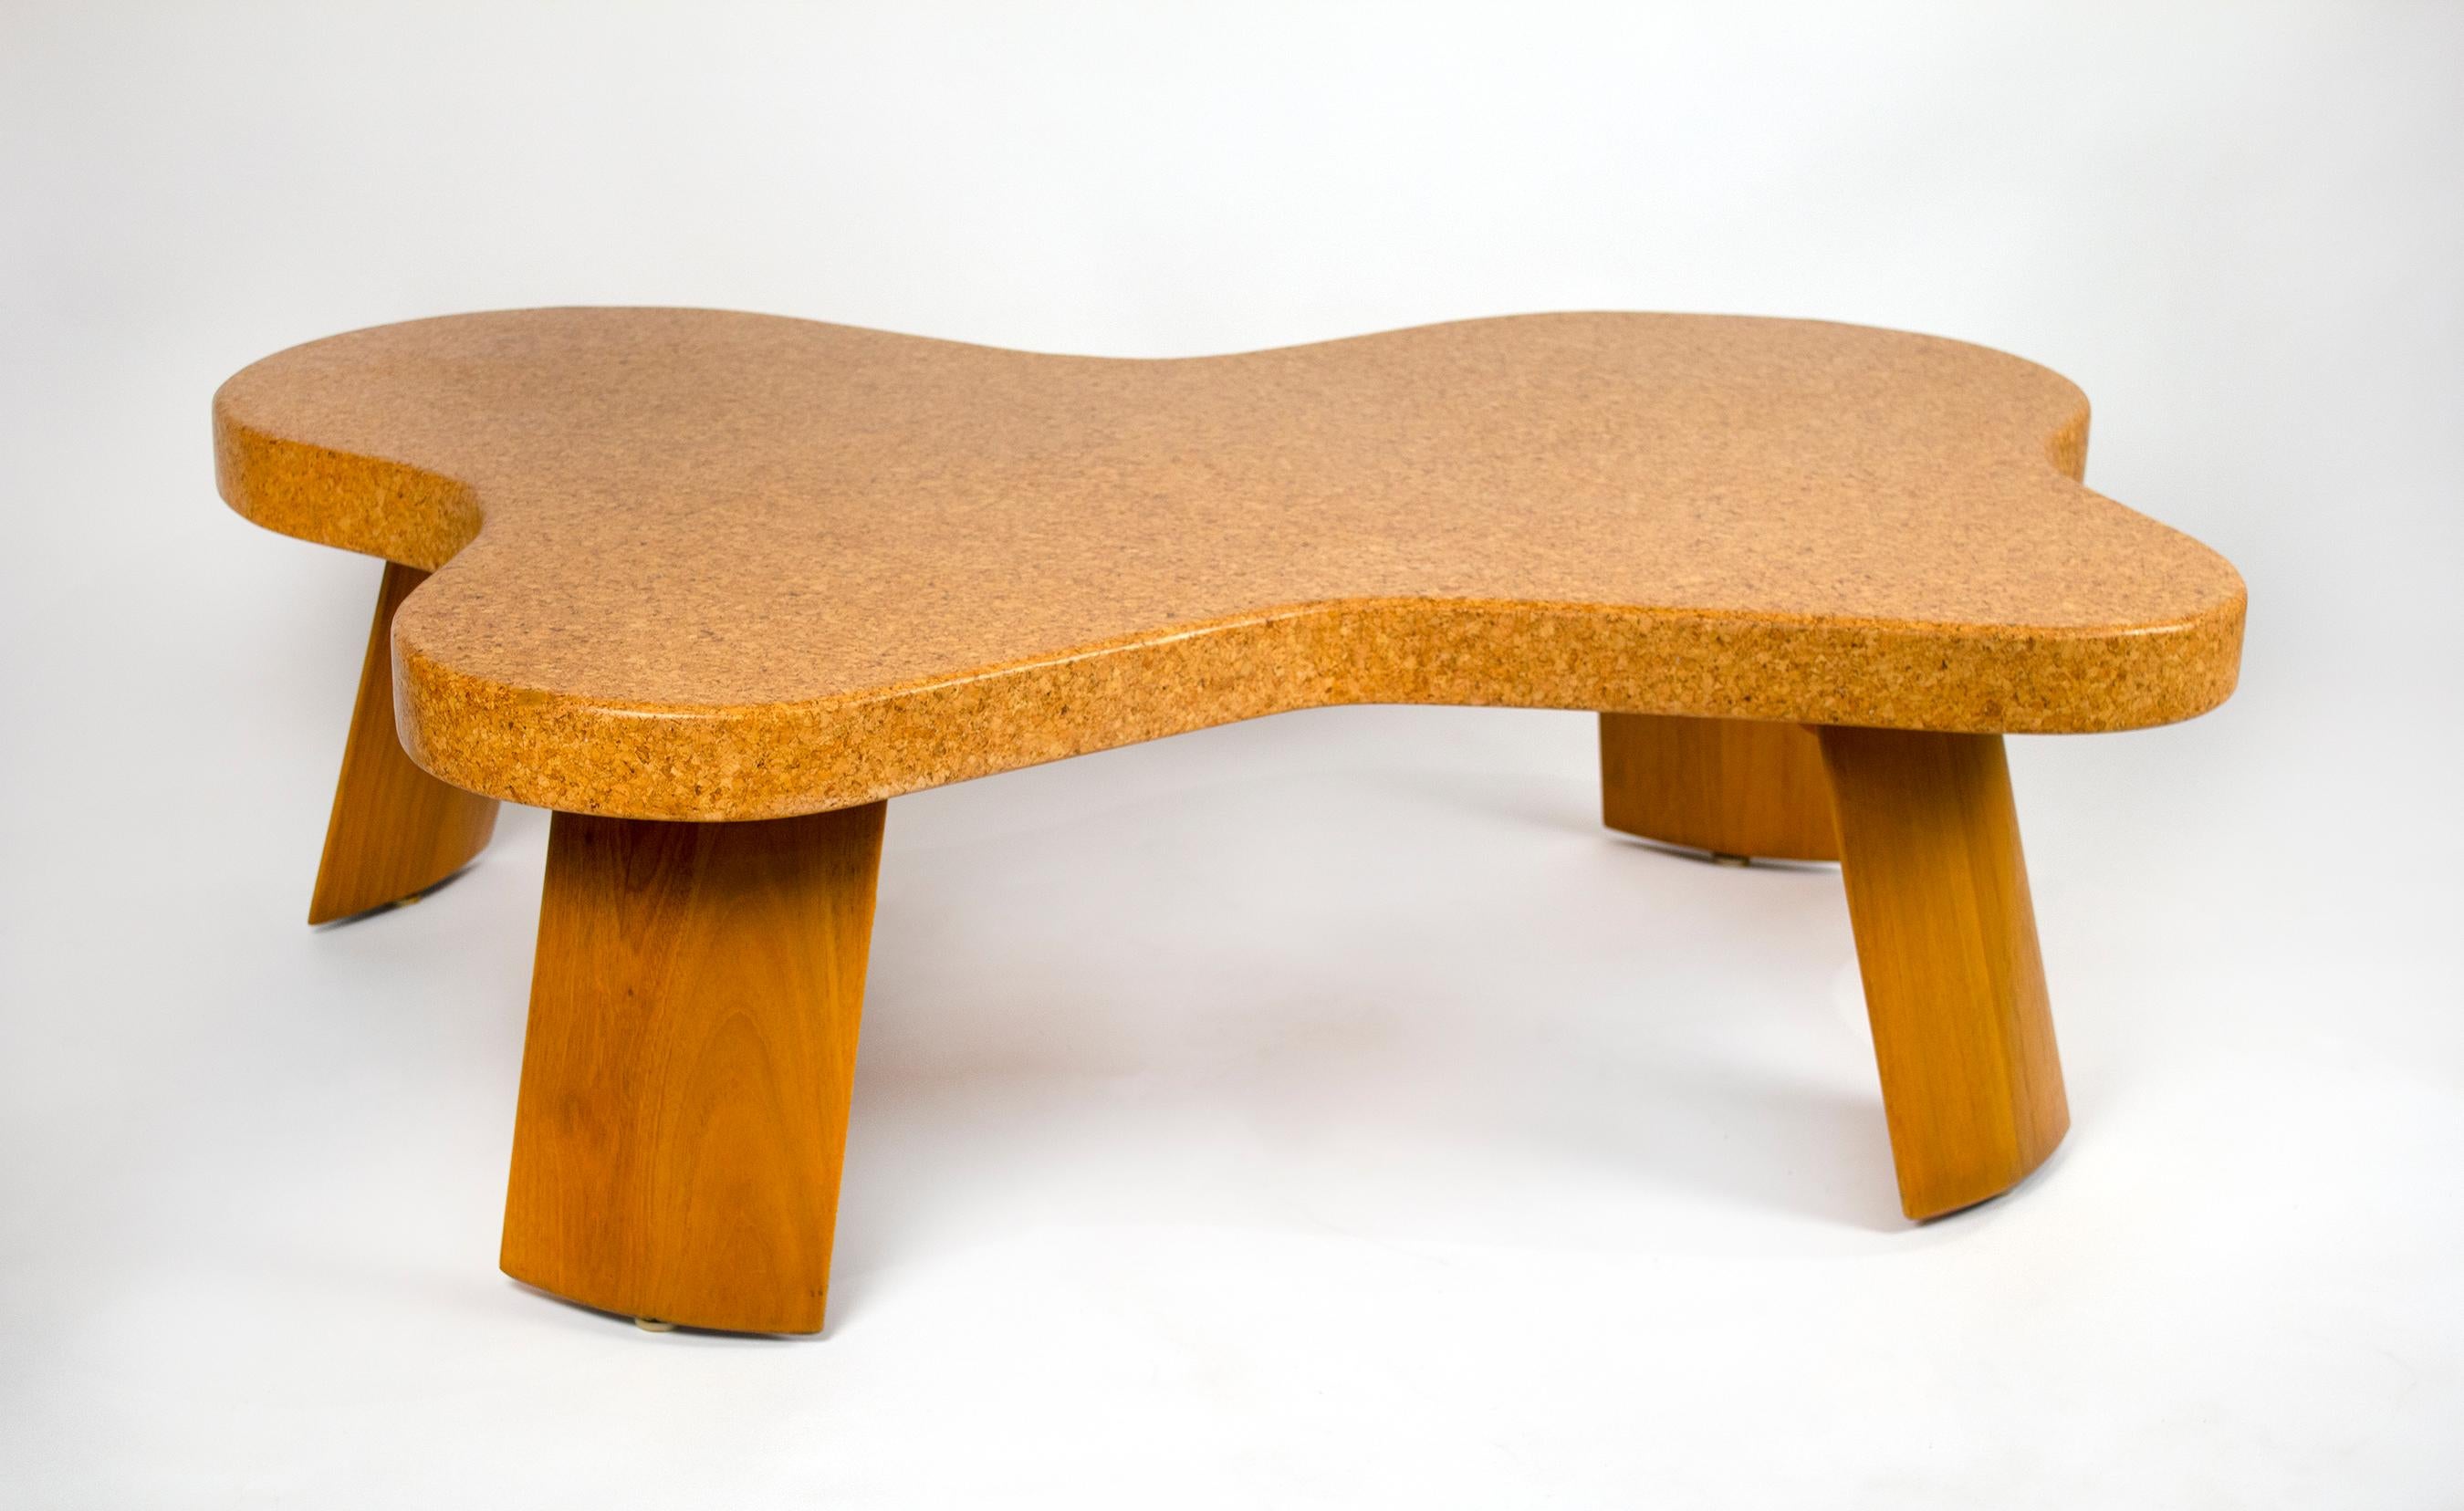 Iconic, early cloud coffee table model 5005 designed by Paul Frankl for Johnson Furniture Company 1951. The table is in very good condition with a natural waxed cork top and bleached mahogany legs. This is the rarest configuration of this table.